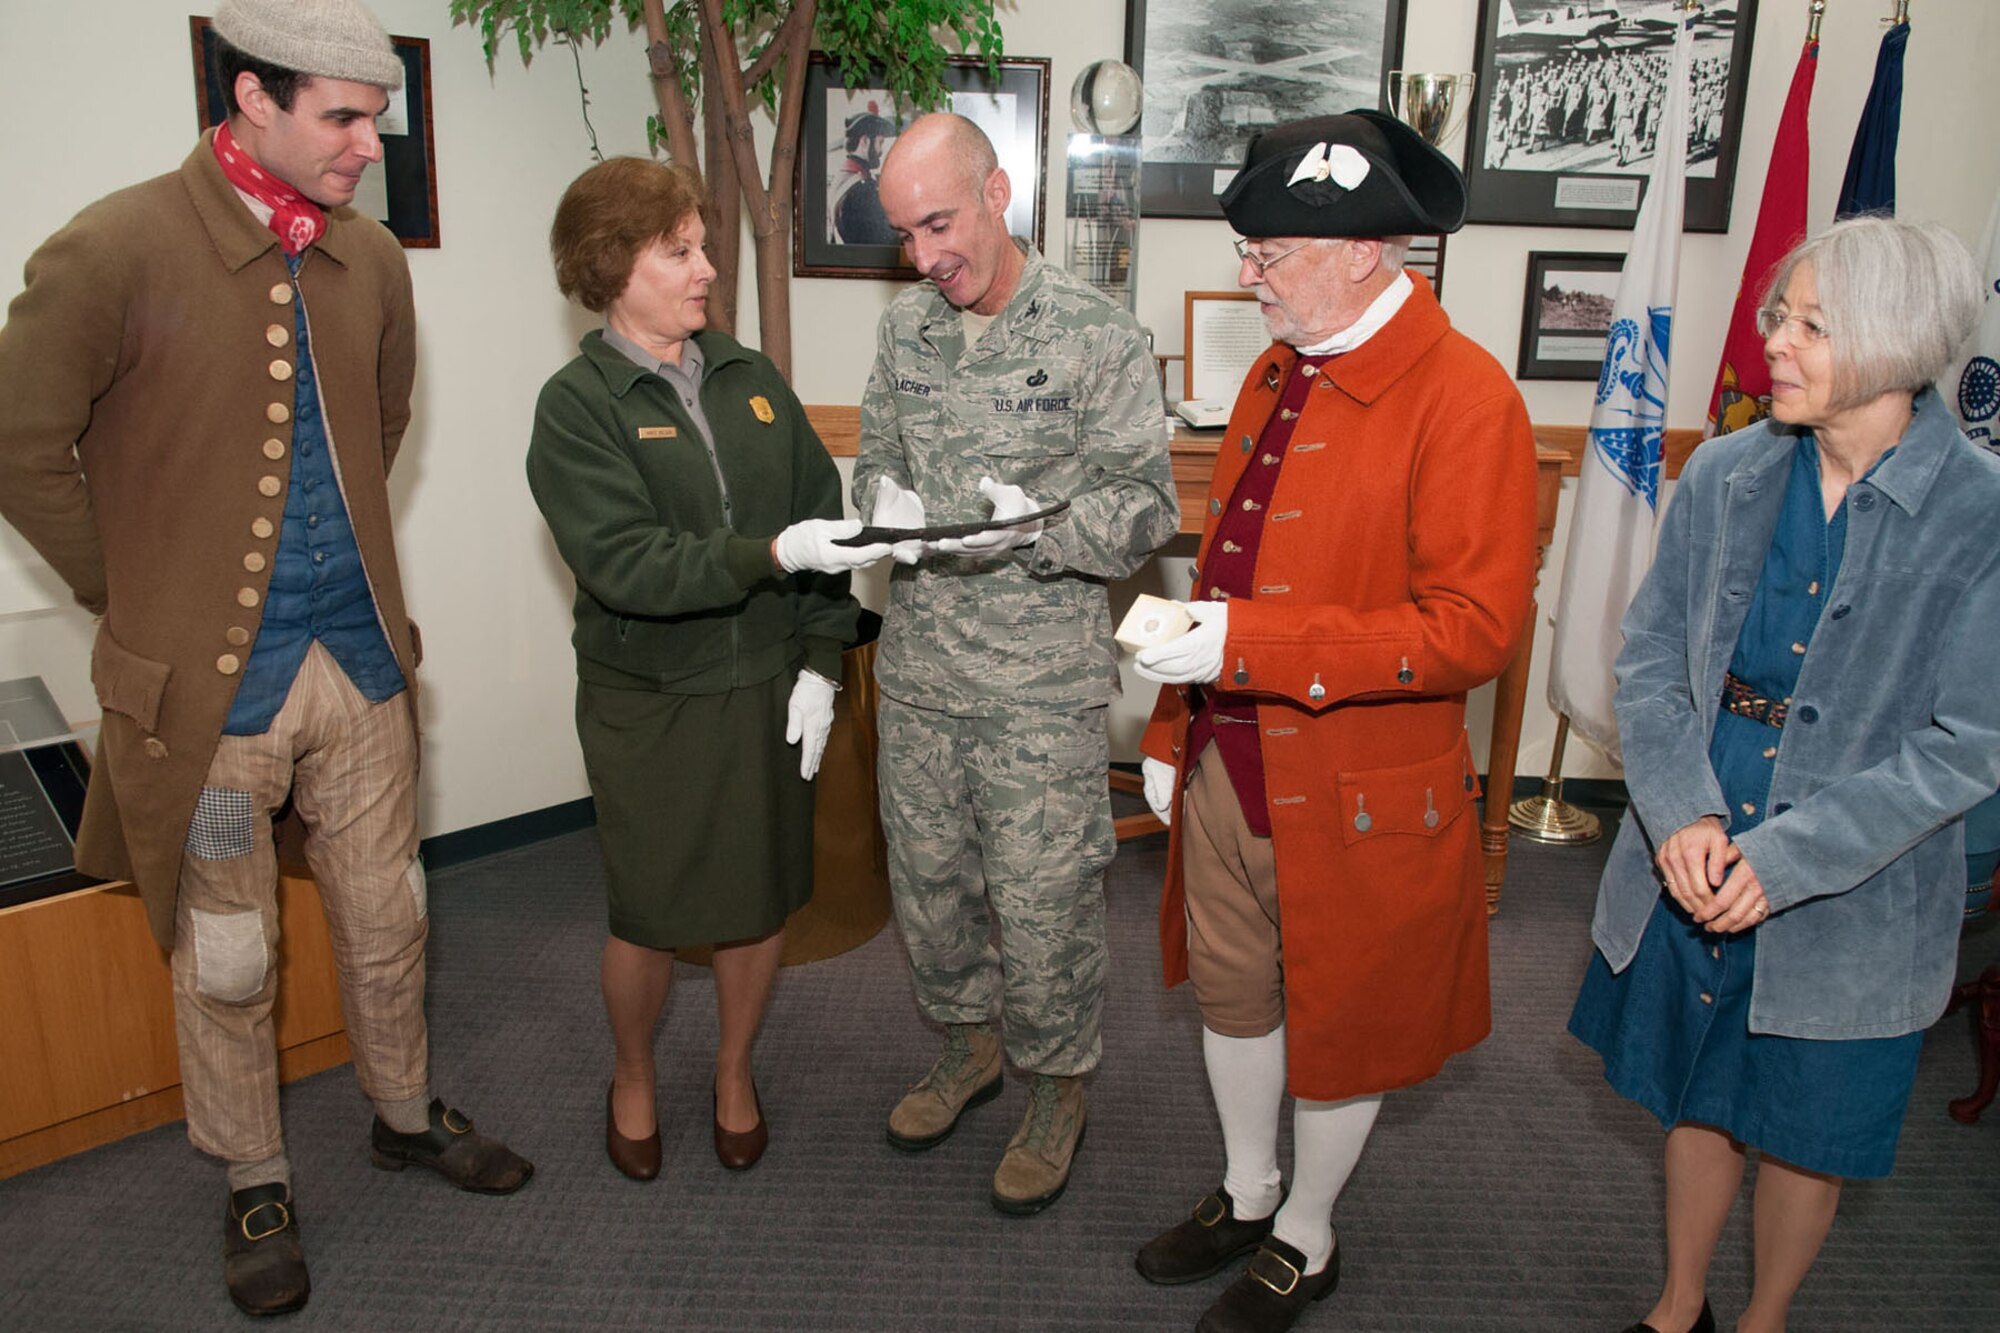 HANSCOM AIR FORCE BASE, Mass. – Col. Lester A. Weilacher (center), 66th Air Base Group commander, hands over a knife from the Revolutionary War battle of Parker’s Revenge to Nancy Nelson, Minute Man National Historical Park superintendent, during a ceremony here Oct. 3, as Lexington Minute Men Michael DaRu (left) and Bill Poole as well as Terrie Wallace, park curator, stand by. Because of Hanscom’s proximity to Revolutionary War sites, archeologists conducted a search on base and, in addition to the knife, uncovered musket balls and a shoe buckle. (U.S. Air Force photo by Rick Berry)